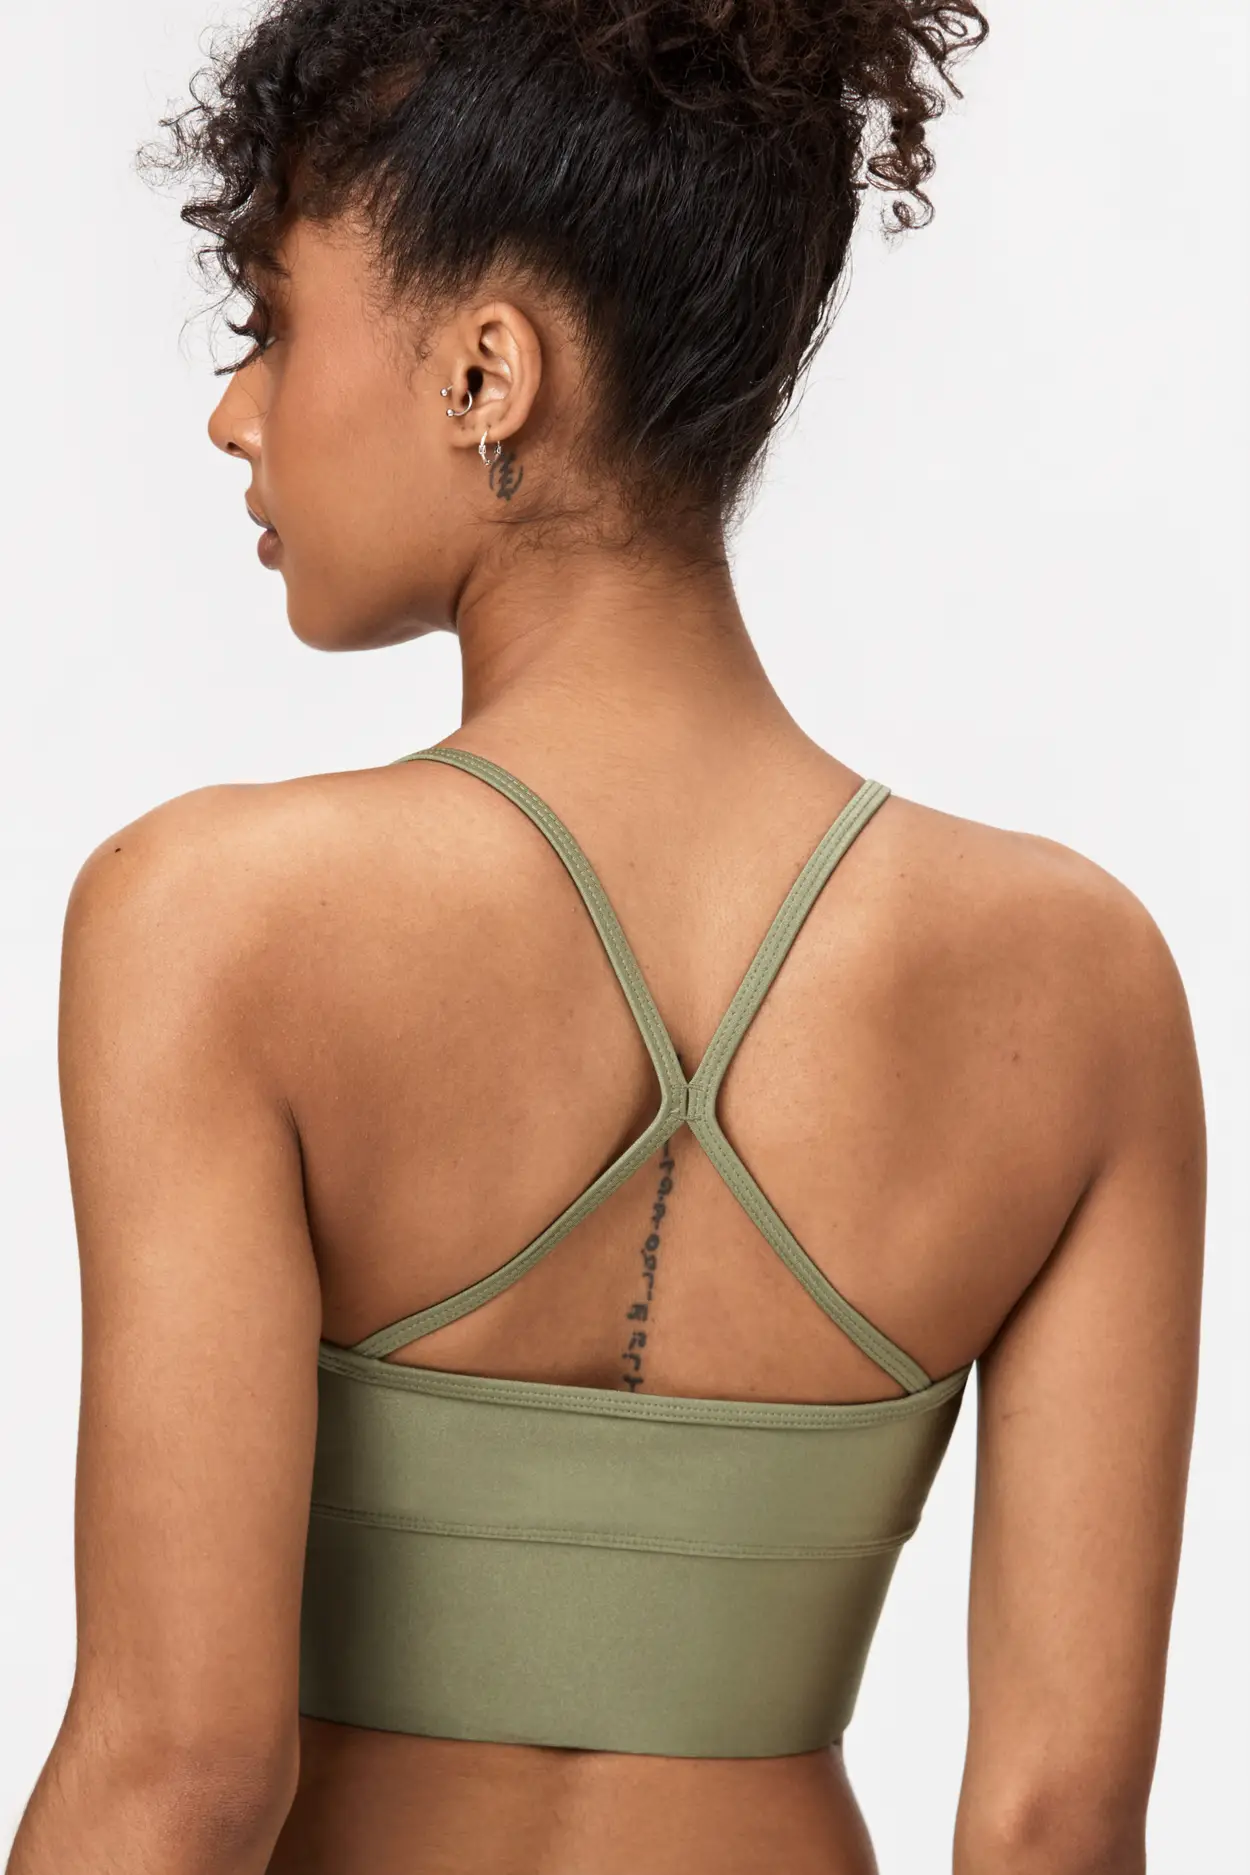 Buy Medium Impact Sports Bras Online By Price & Size – tagged Green